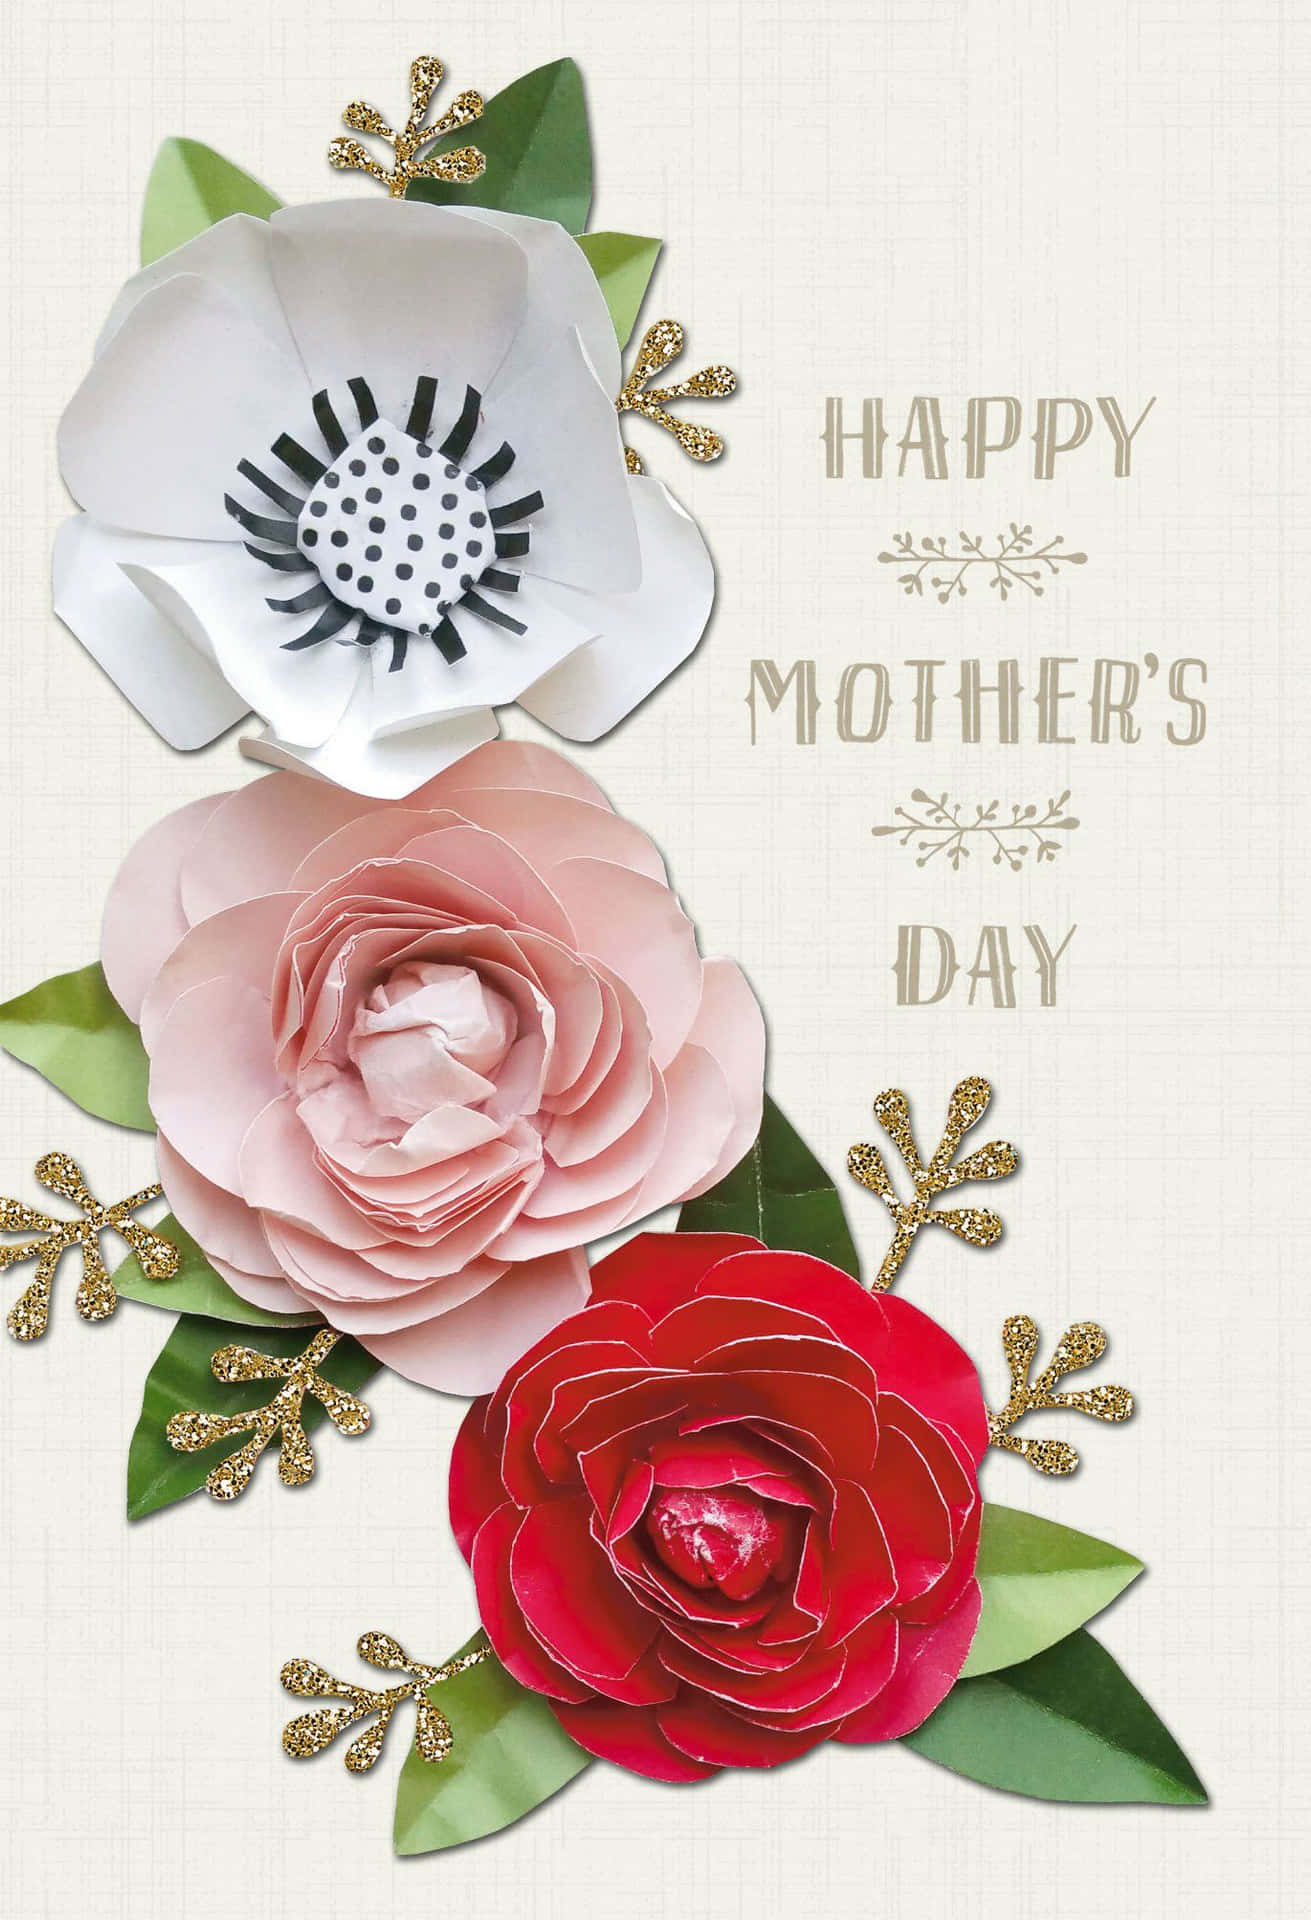 Happy Mothers Day Card With Flowers